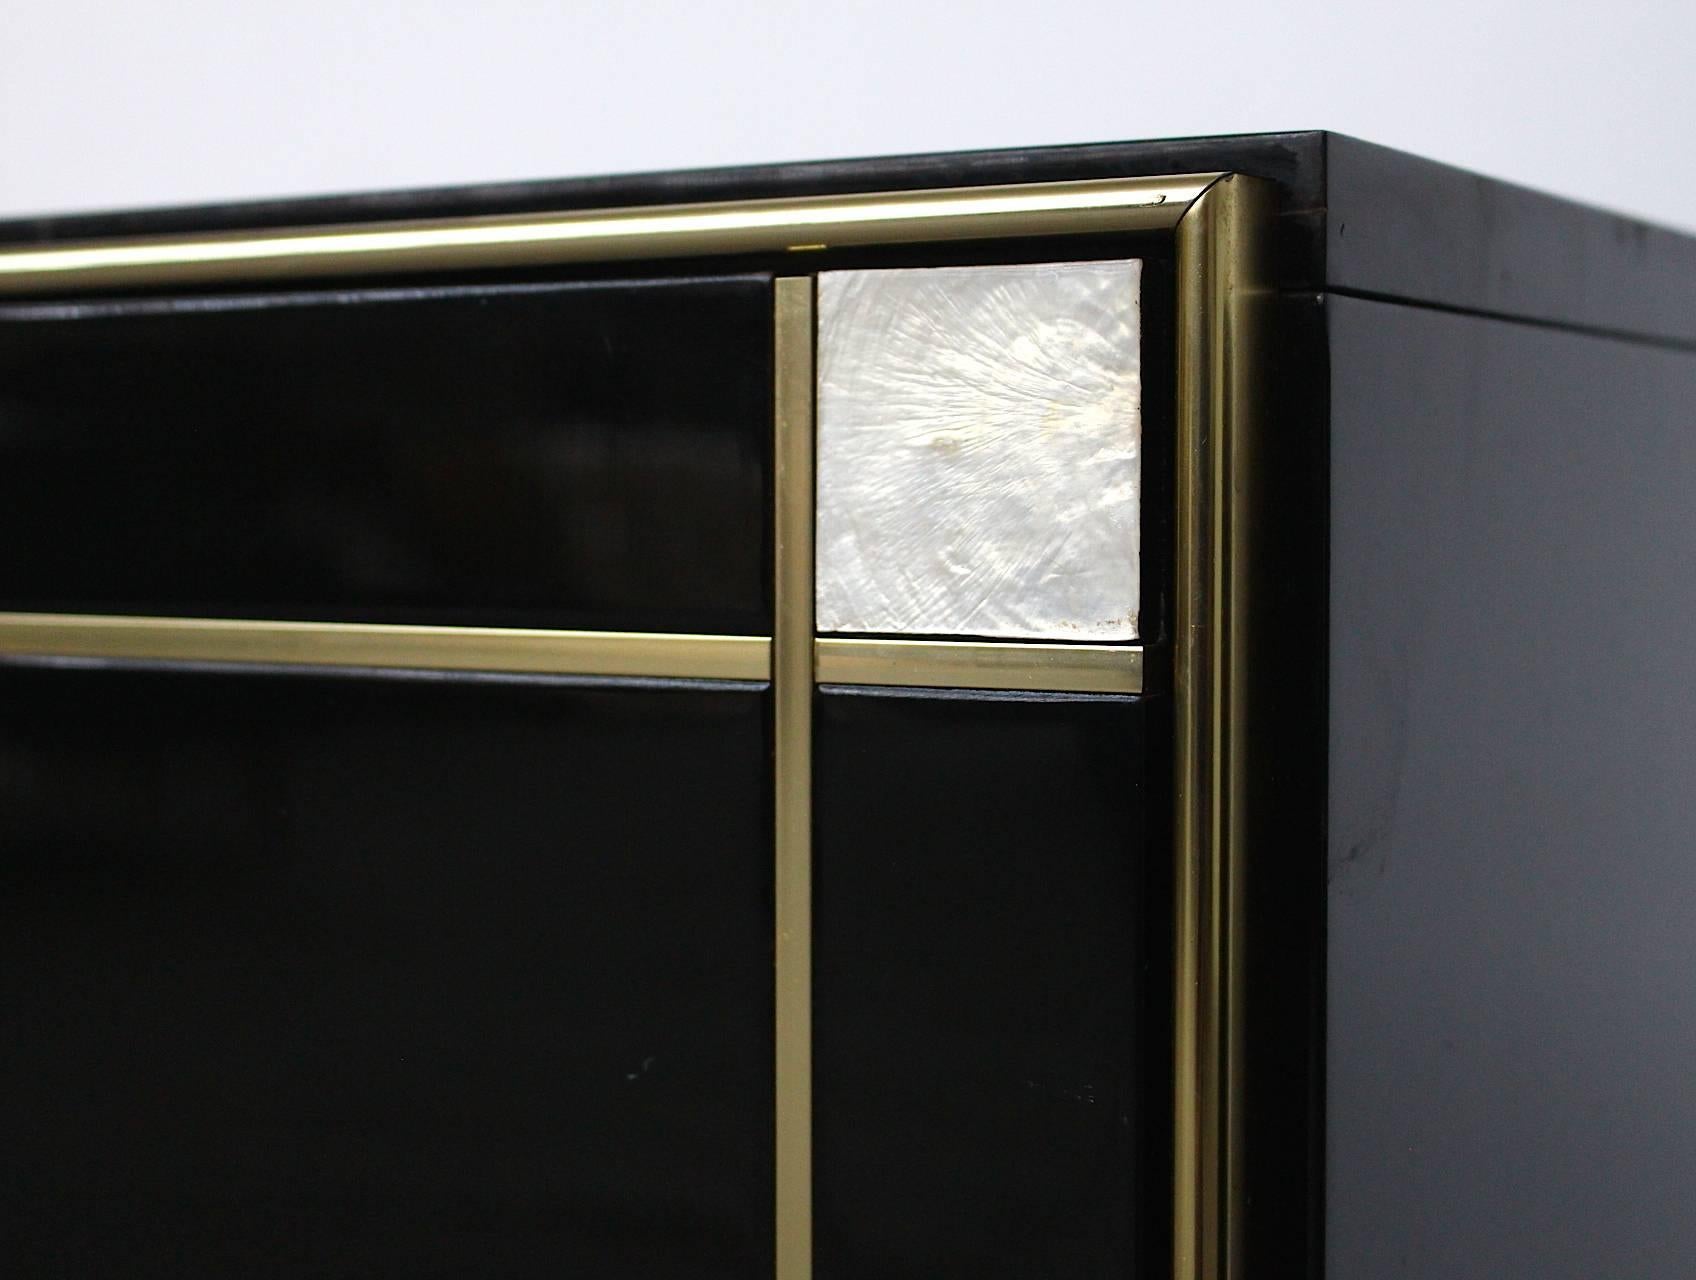 Set of two very chic Hollywood Regency black high gloss piano lacquer cabinets with amazing mother-of-pearl inlay around the doors and sleek brass door handles. Designed by Willy Rizzo for the prestigious luxury retailer Mario Sabot in Italy. Both